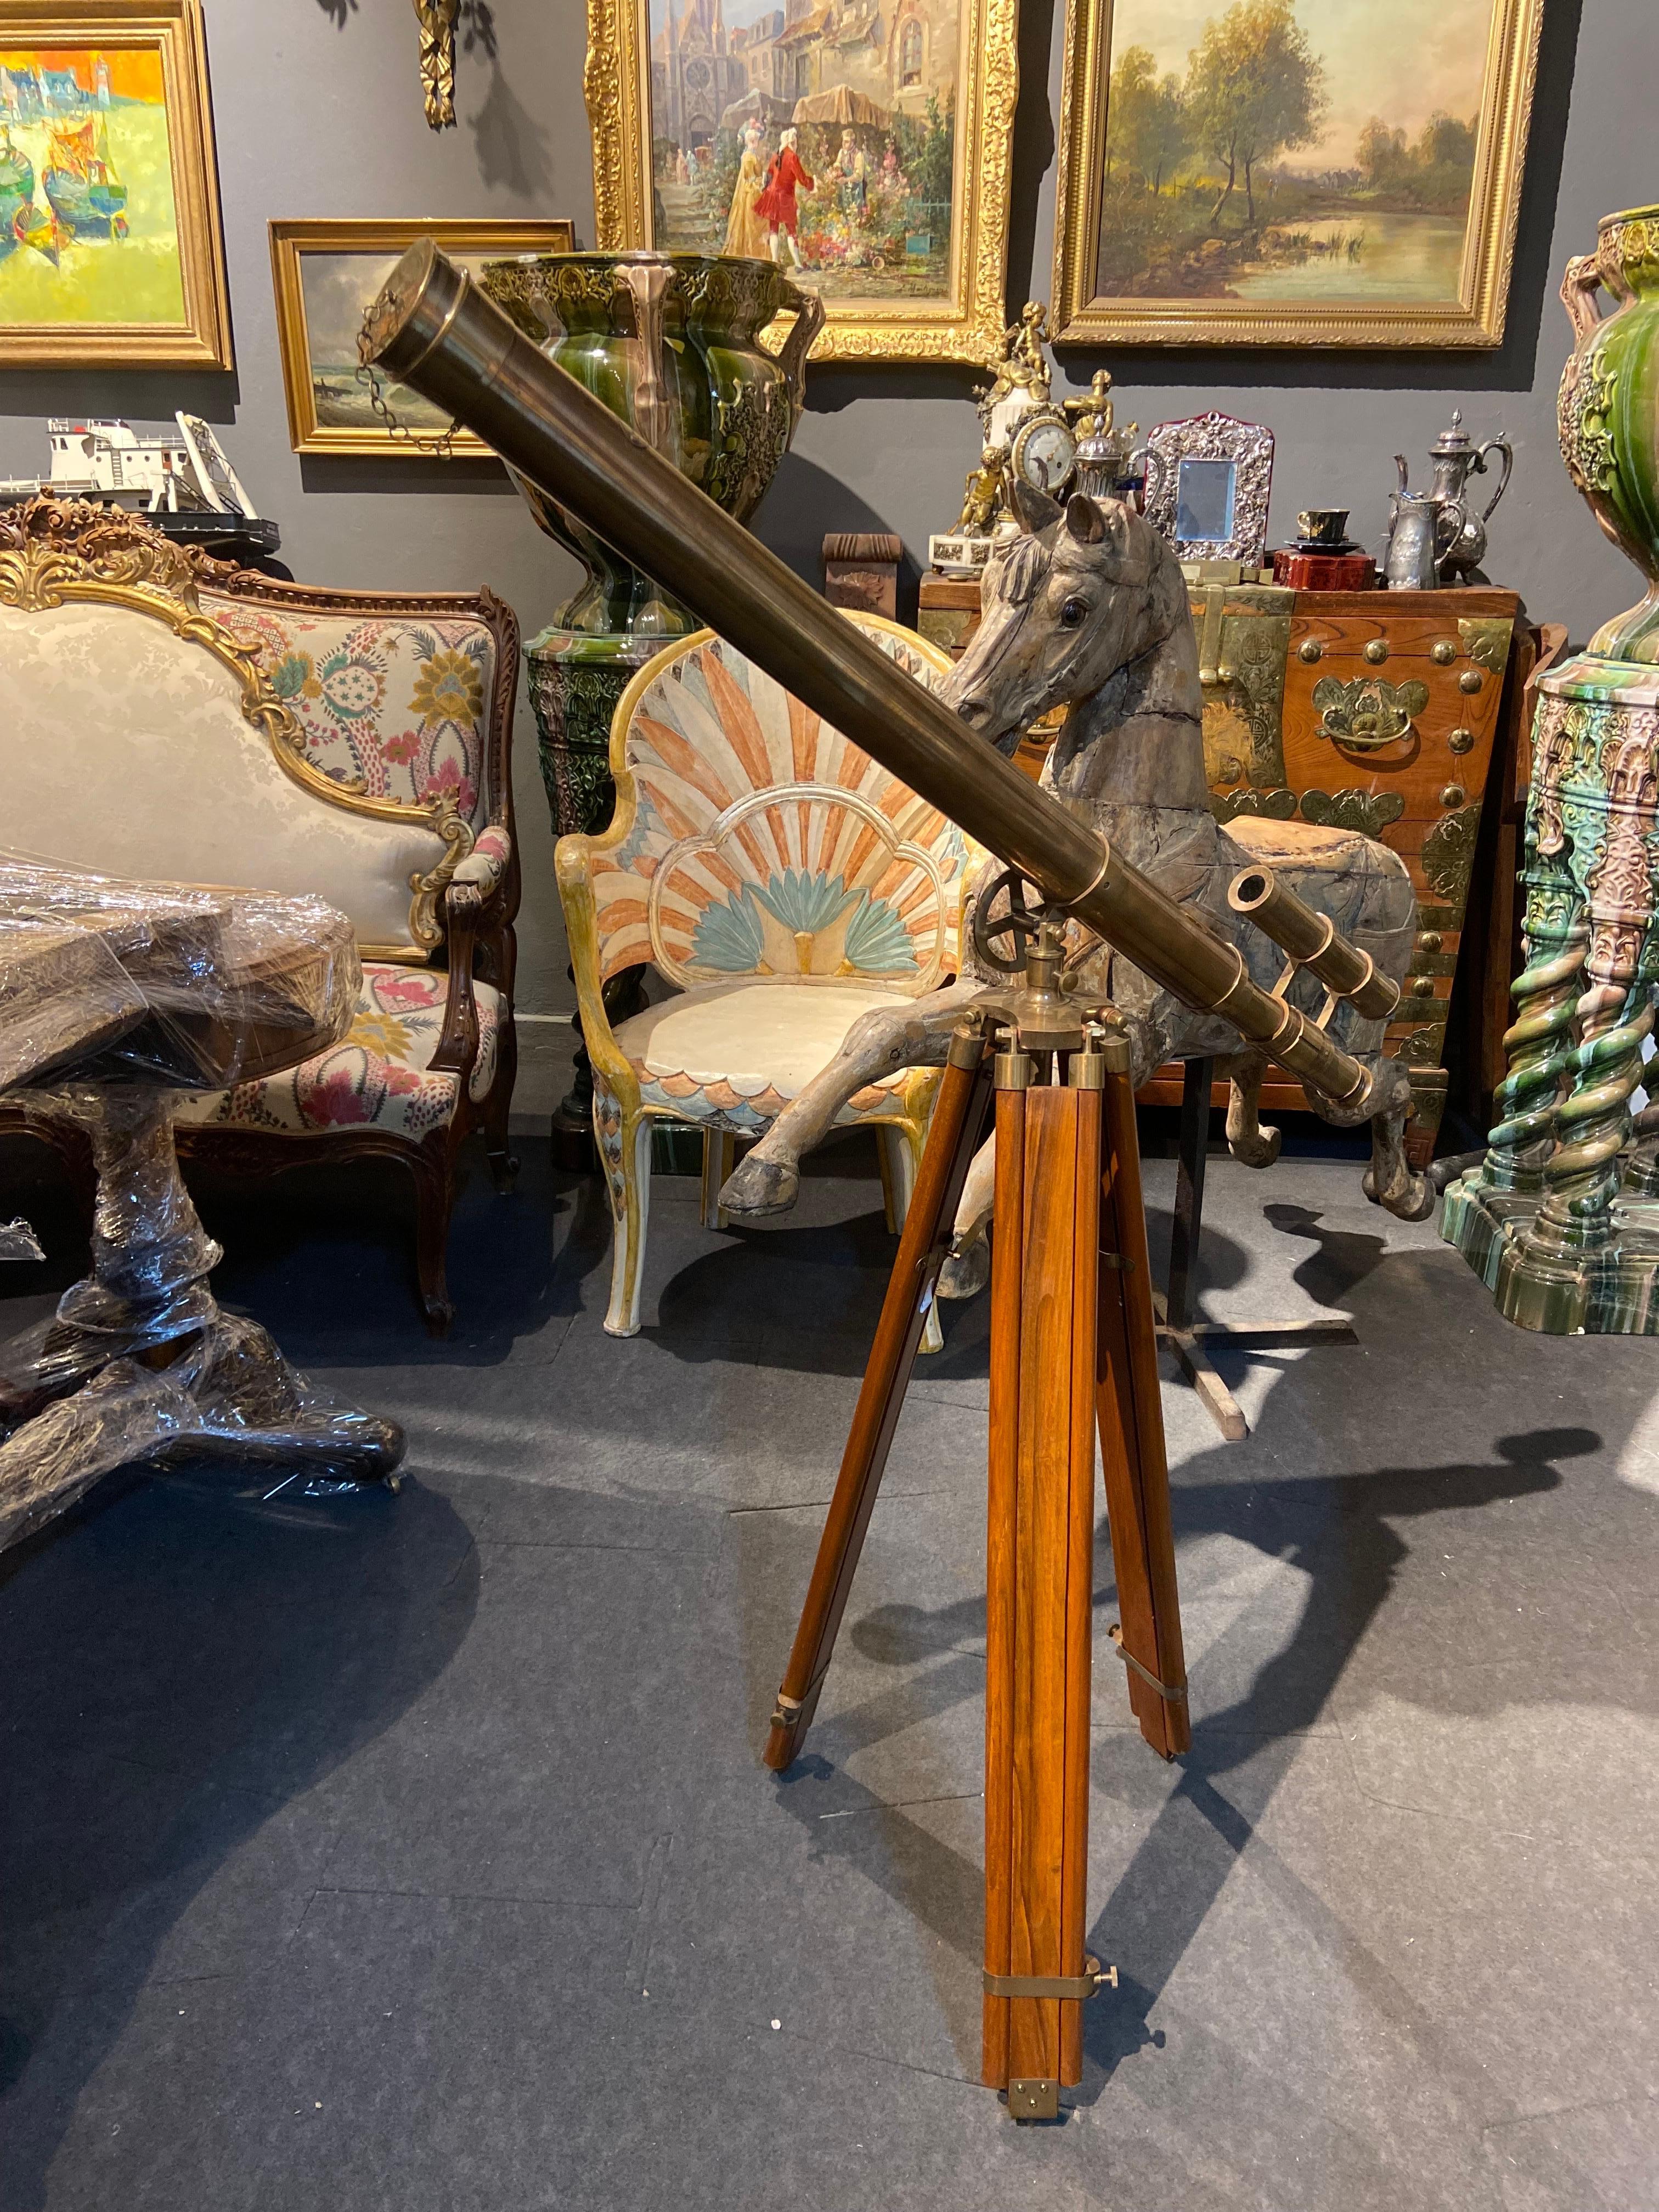 20th Century large antique double barel Victorian brass telescope raised on a foldable wooden tripod made in London in 1915.
Very good original condition.

